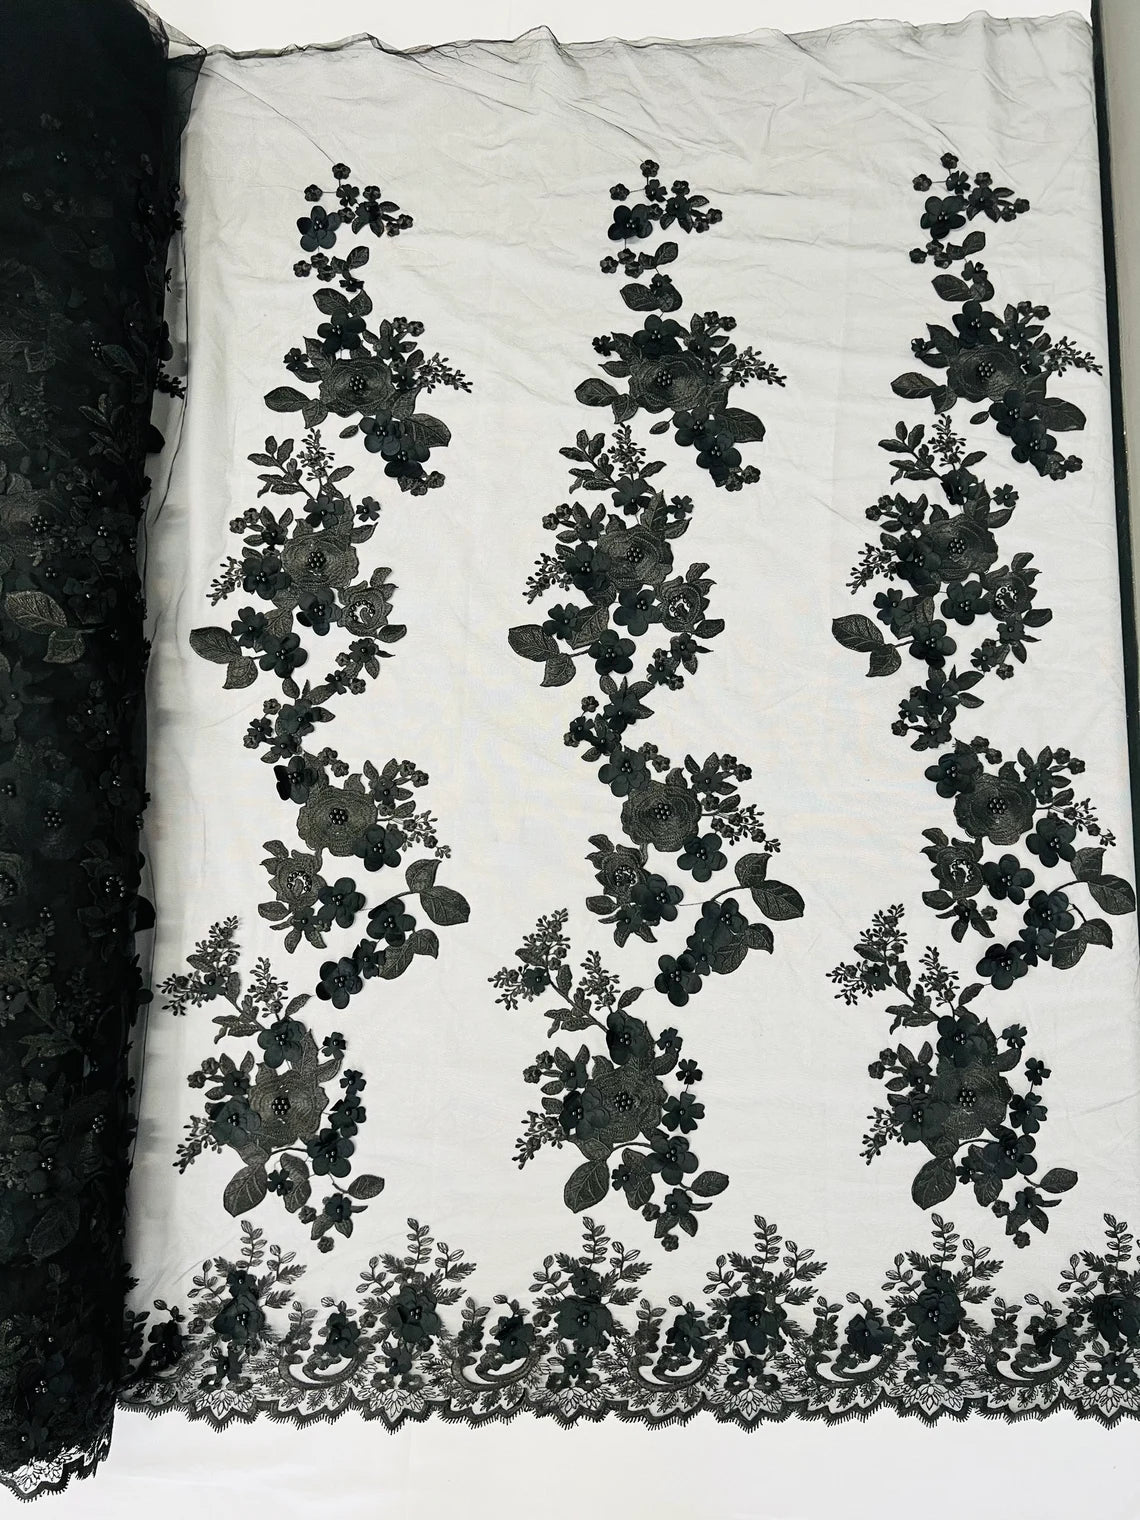 3D Flower Panels Fabric - Black - Flower Panels Bead Embroidered on Lace Fabric Sold By Yard